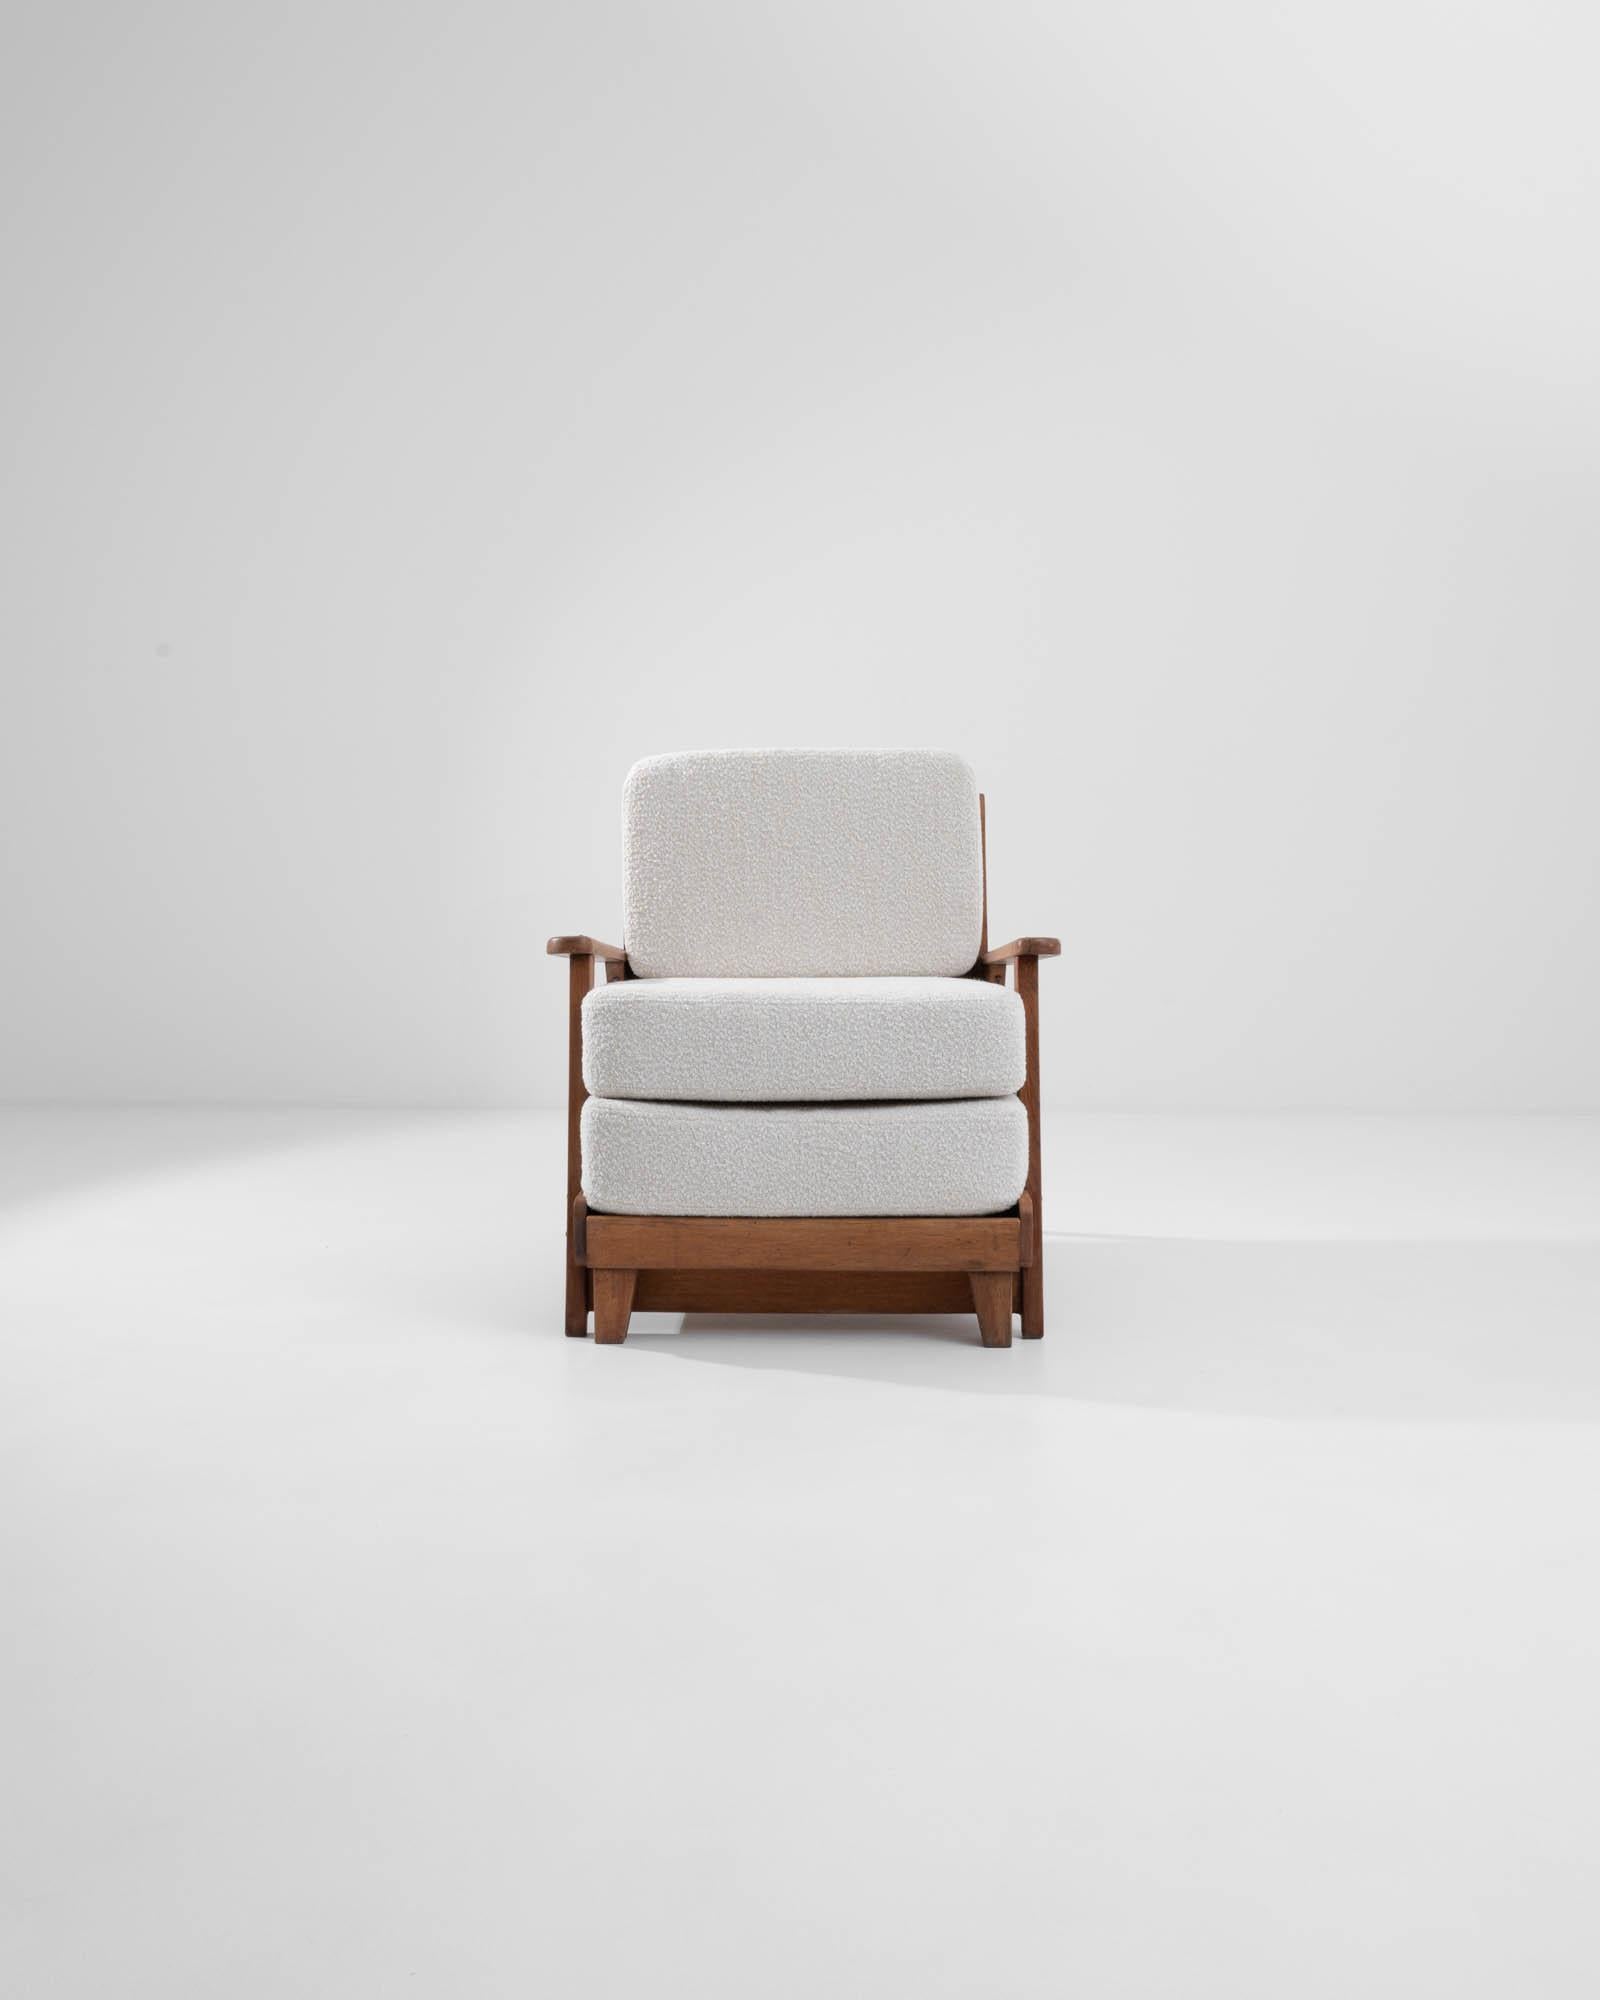 A 20th century wooden upholstered armchair created in 20th century central Europe. In classic mid-century central European style, this fascinating armchair blends a chic minimalism with a warm and cozy appeal. A charming feat of design, this chair